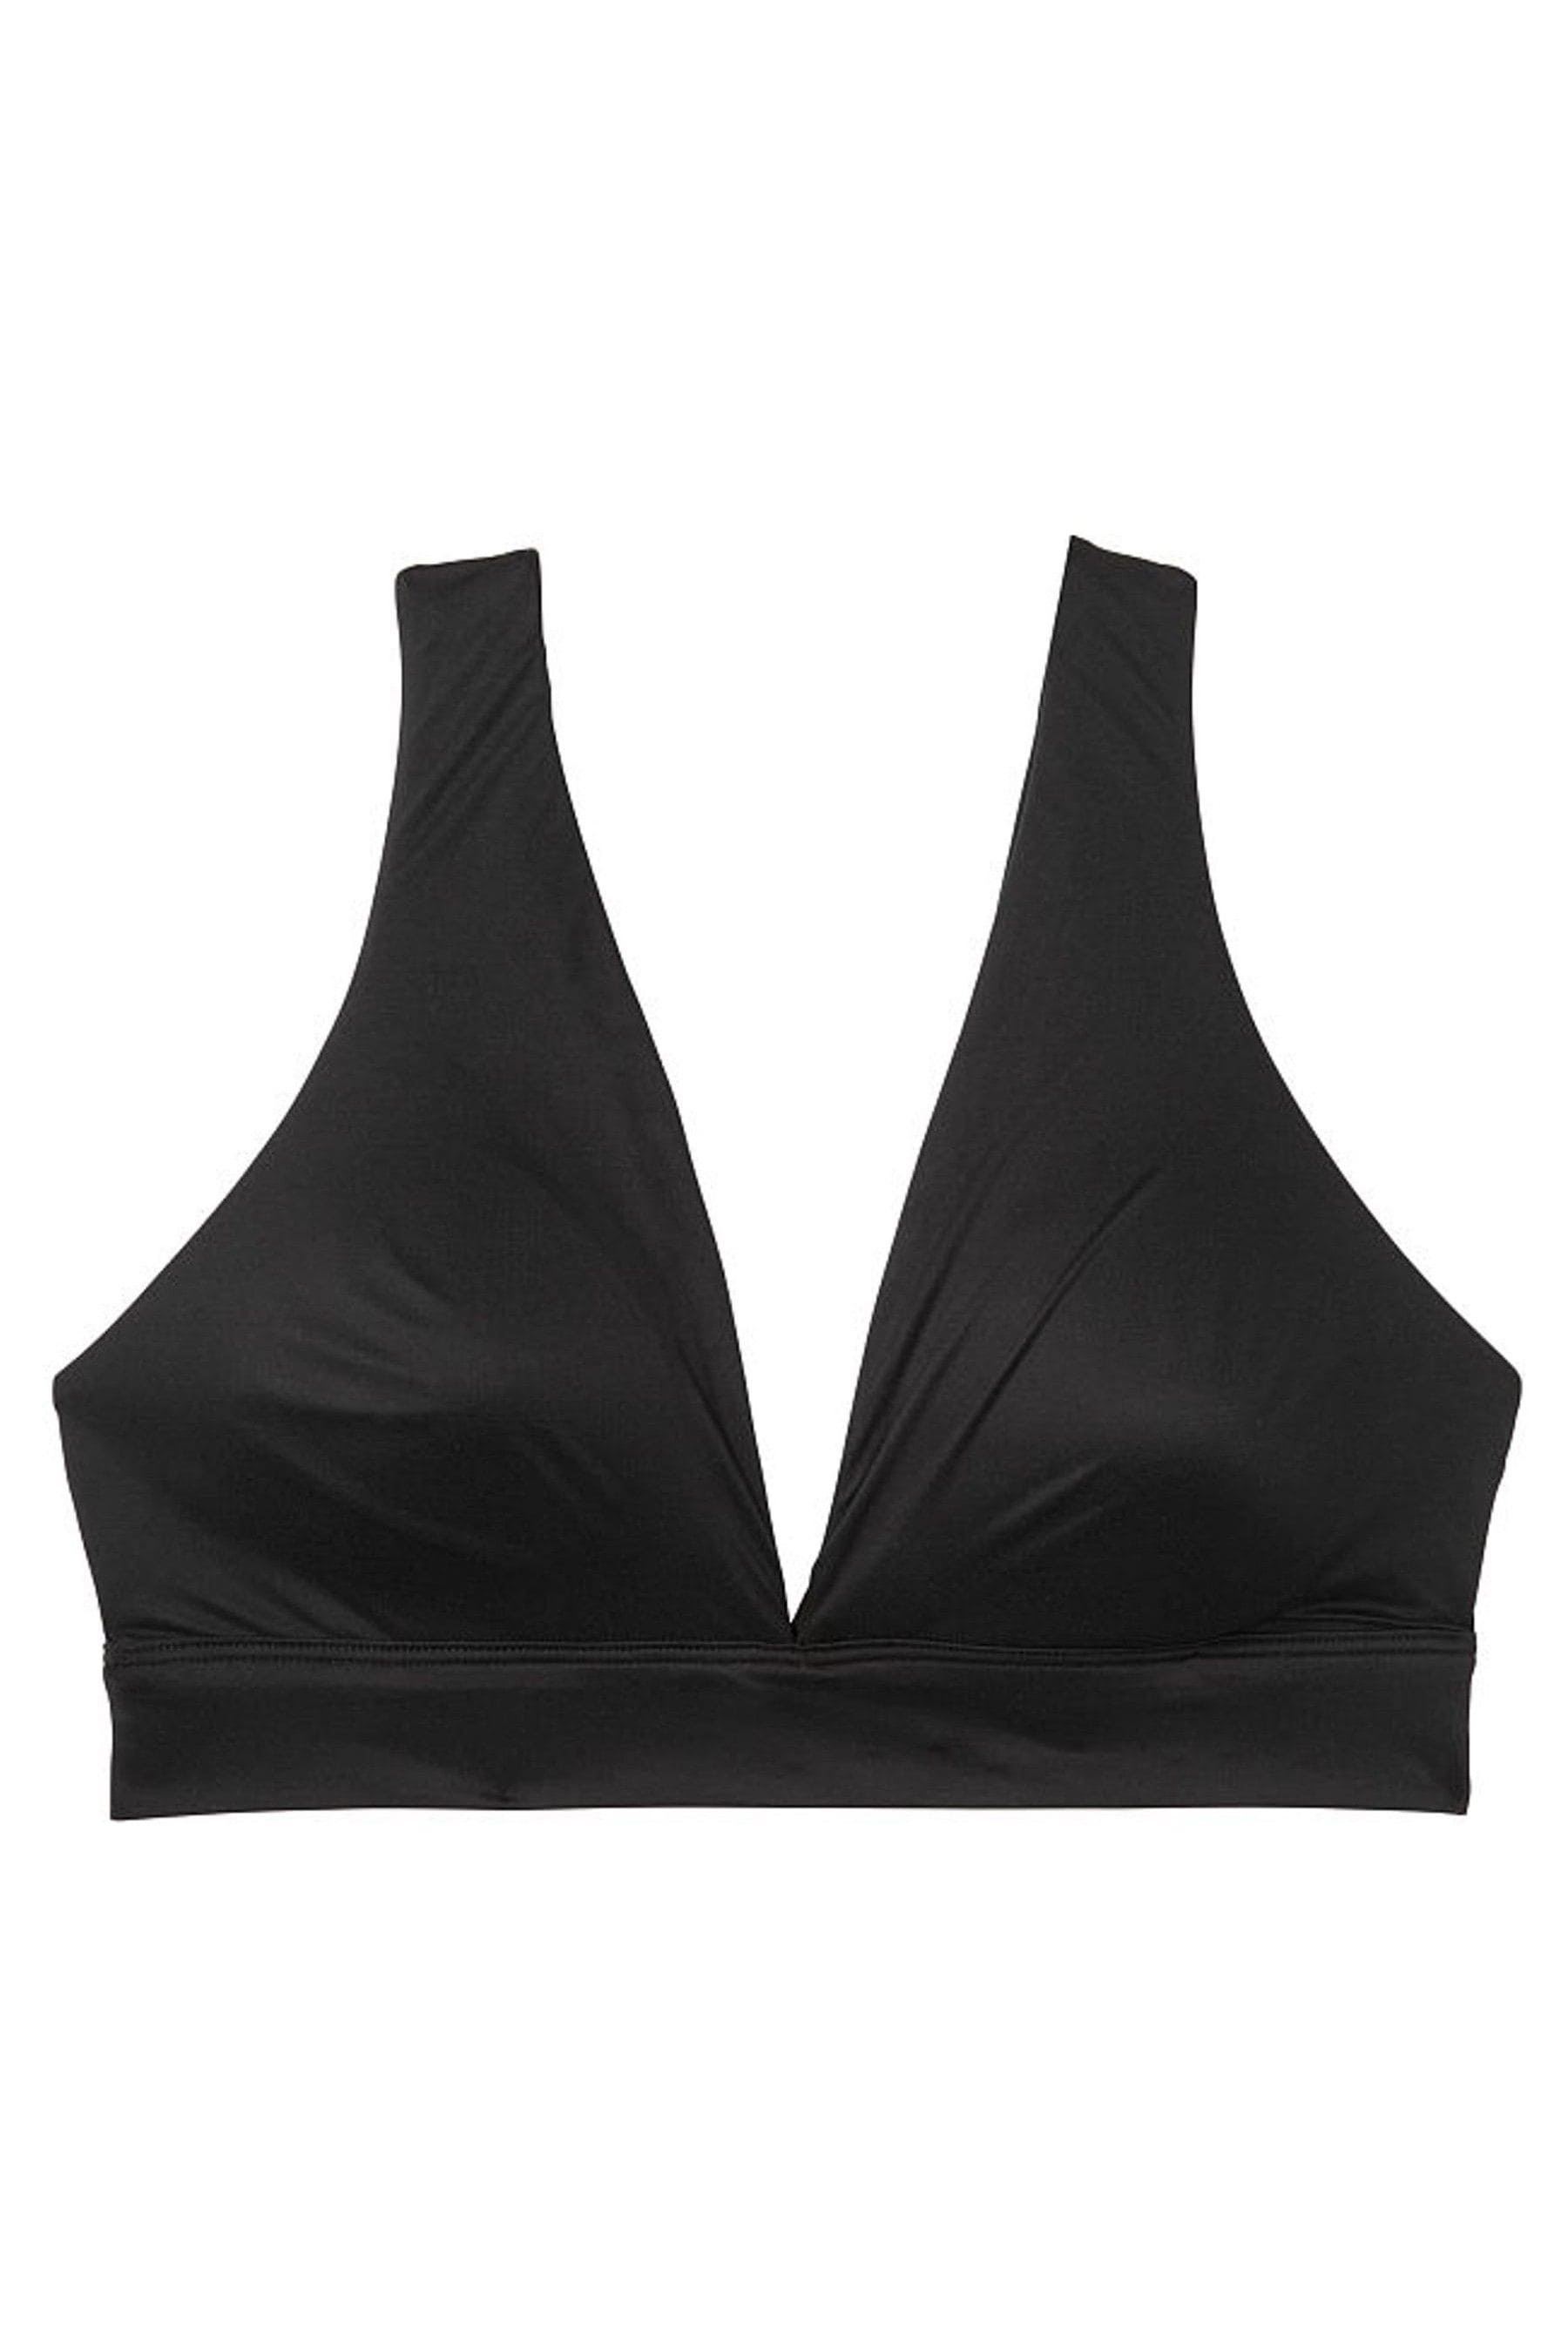 Buy Victoria's Secret Unlined Soft Wireless Lounge Bra from the ...